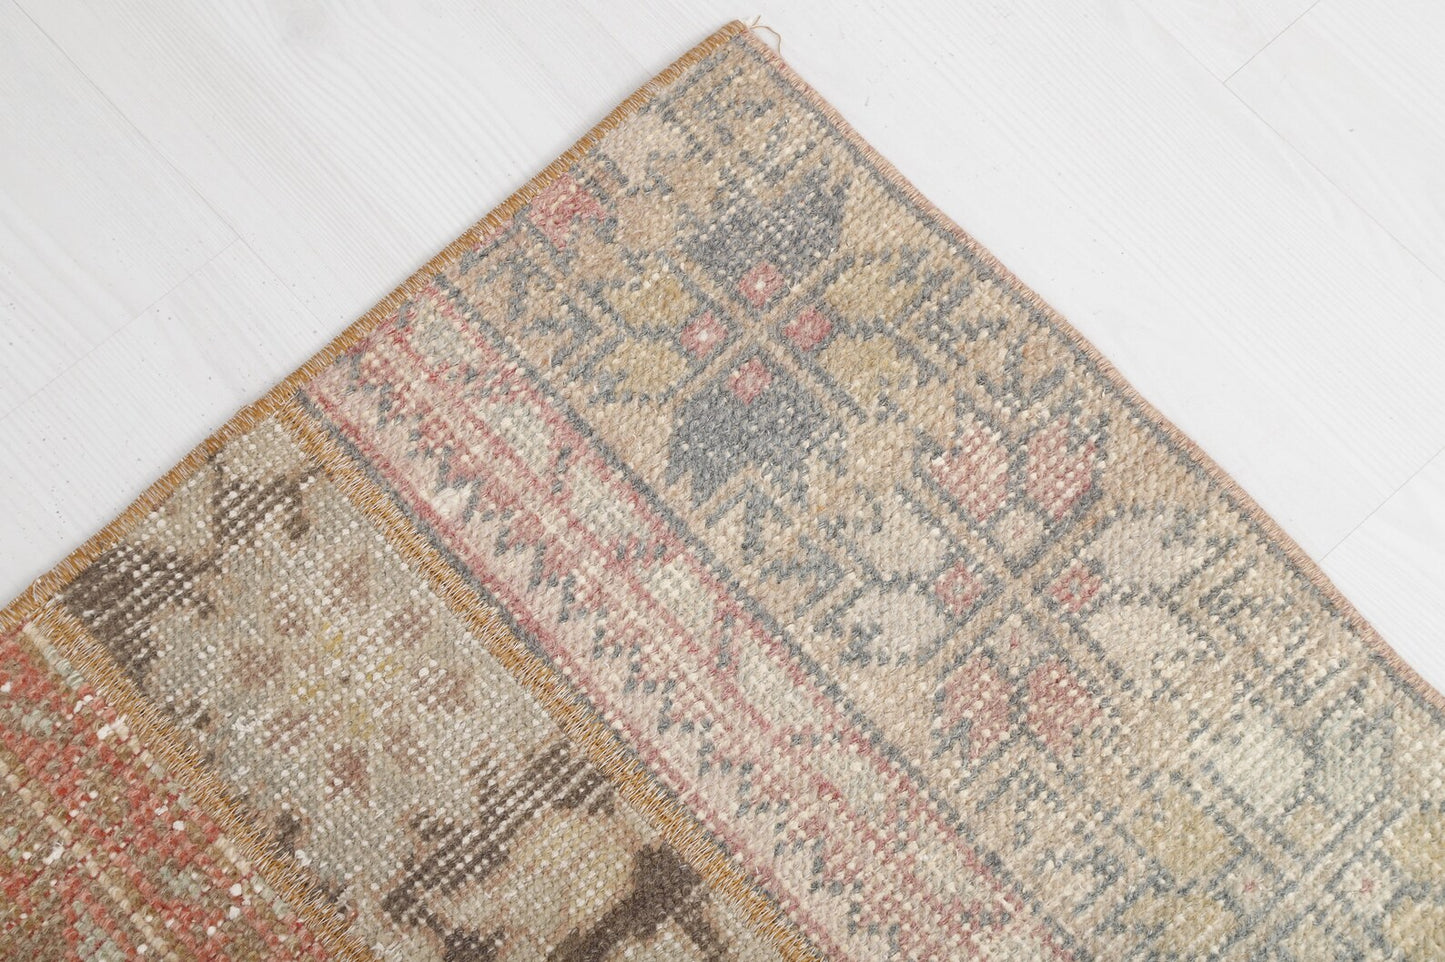 Gorgeous vintage rug from Turkey with earth toned colors and intricate, yet subtle designs. Measures 3.4 x 4.7' and made from 50% cotton and 50% wool. This Turkish rug has been professionally washed before we received it so it is 100% clean and ready to use. 